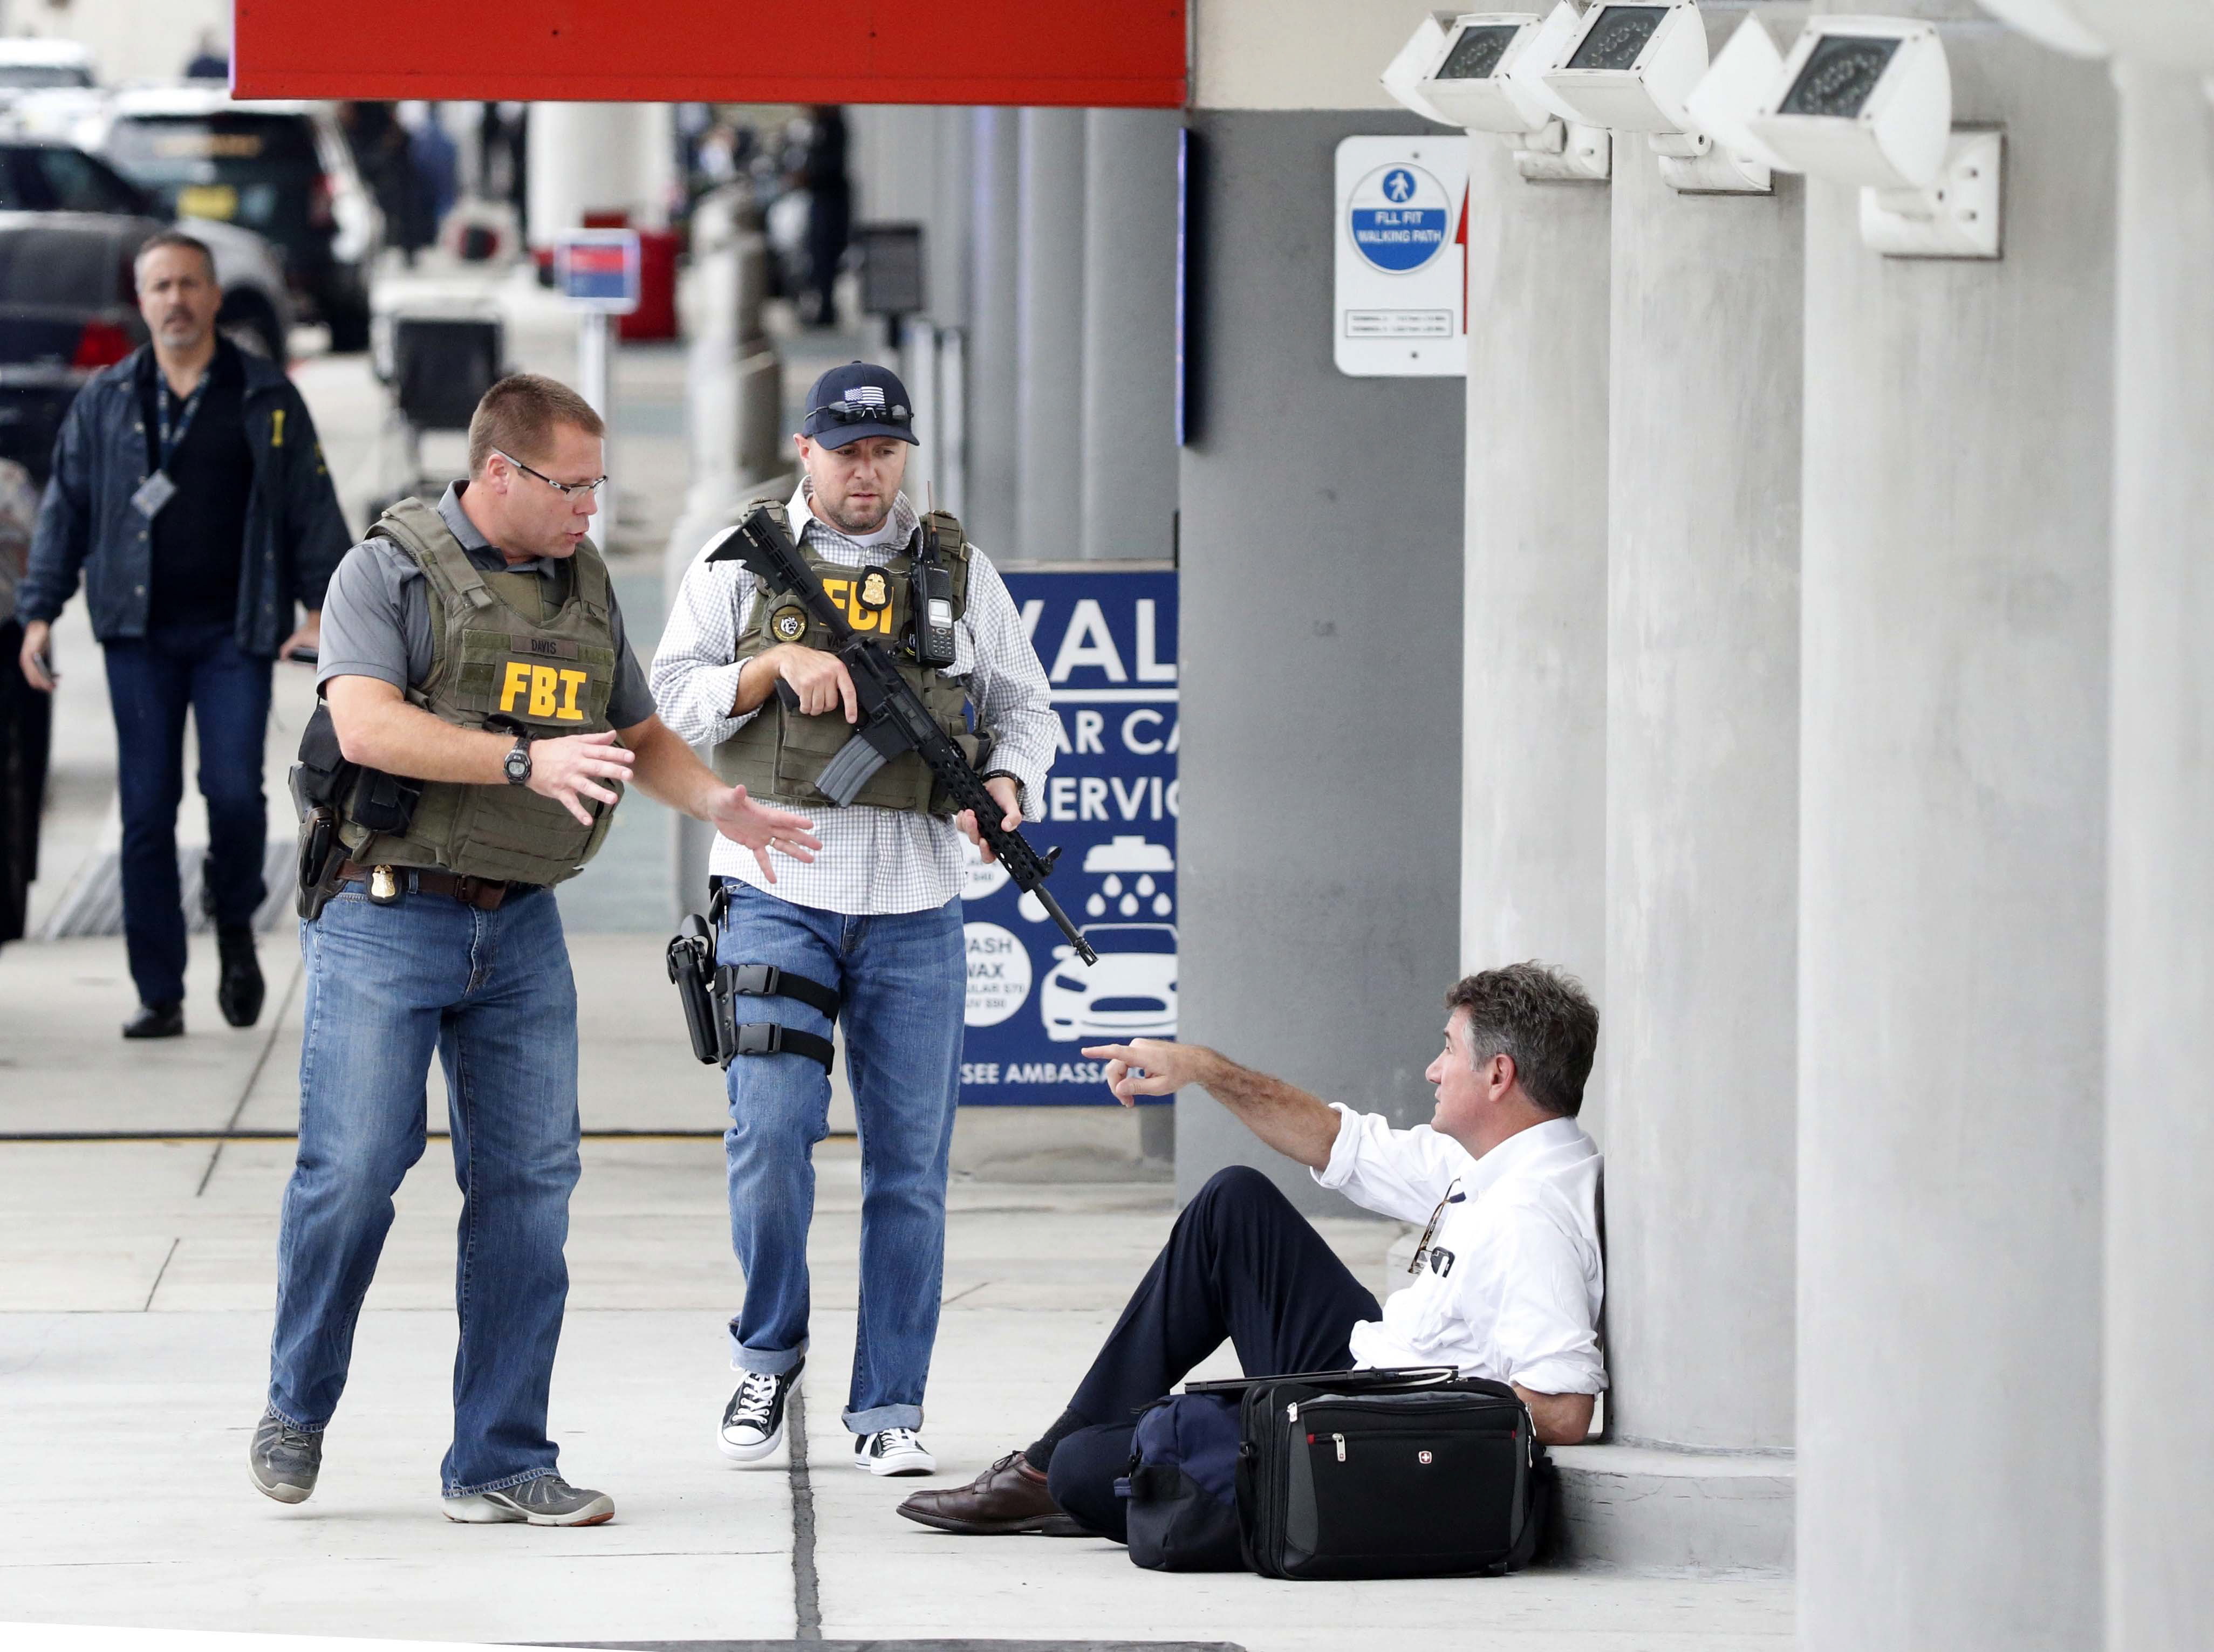 A law enforcement officers talk to a man at Fort LauderdaleÄìHollywood International Airport, Friday, Jan. 6, 2017, in Fort Lauderdale, Fla.   A gunman opened fire in the baggage claim area at the airport Friday, killing several people and wounding others before being taken into custody in an attack that sent panicked passengers running out of the terminal and onto the tarmac, authorities said.